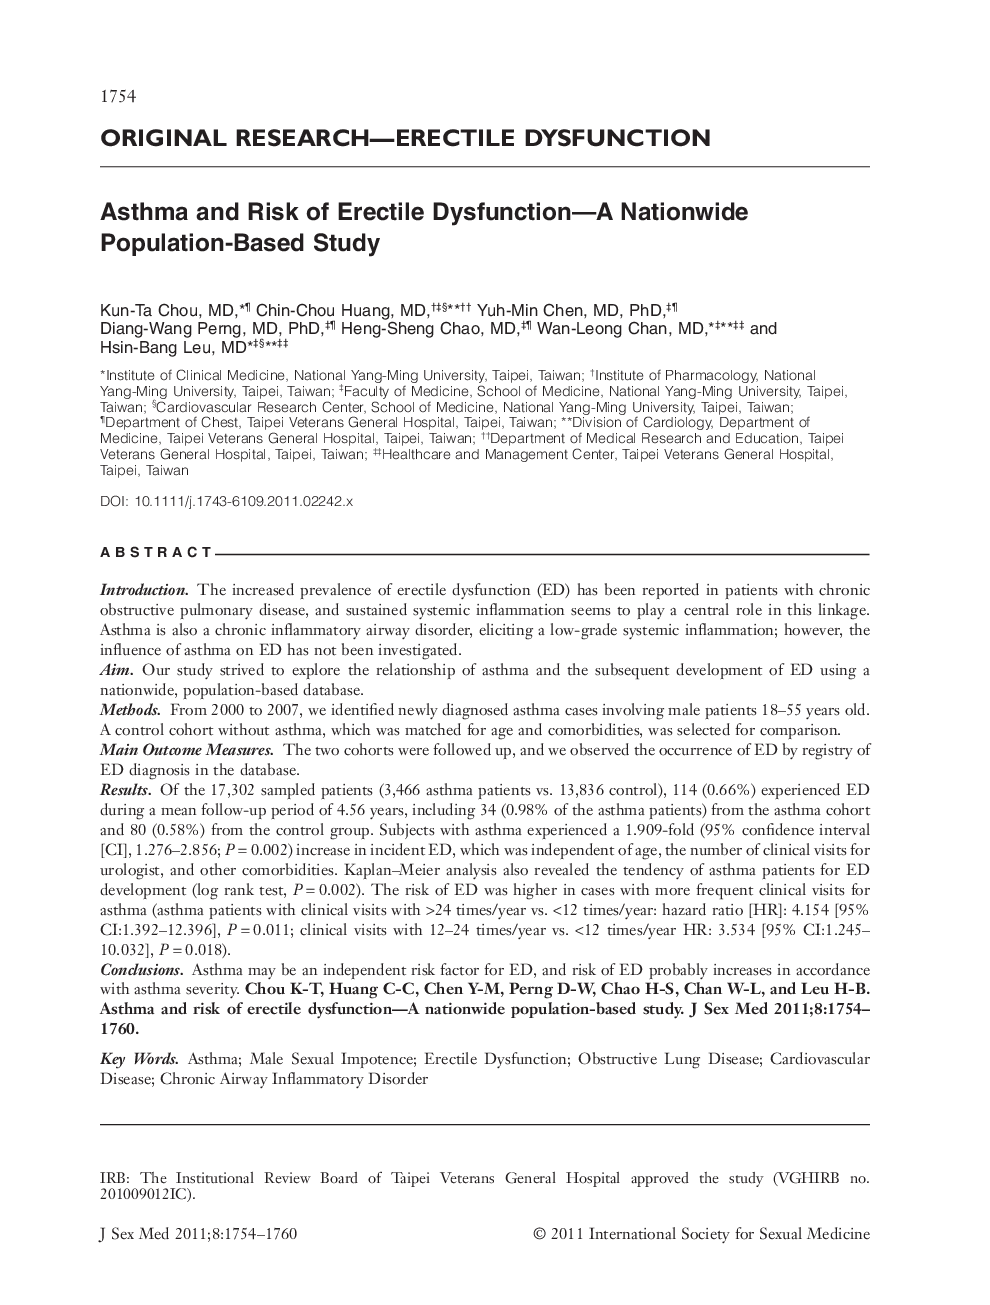 Asthma and Risk of Erectile Dysfunction-A Nationwide Population-Based Study